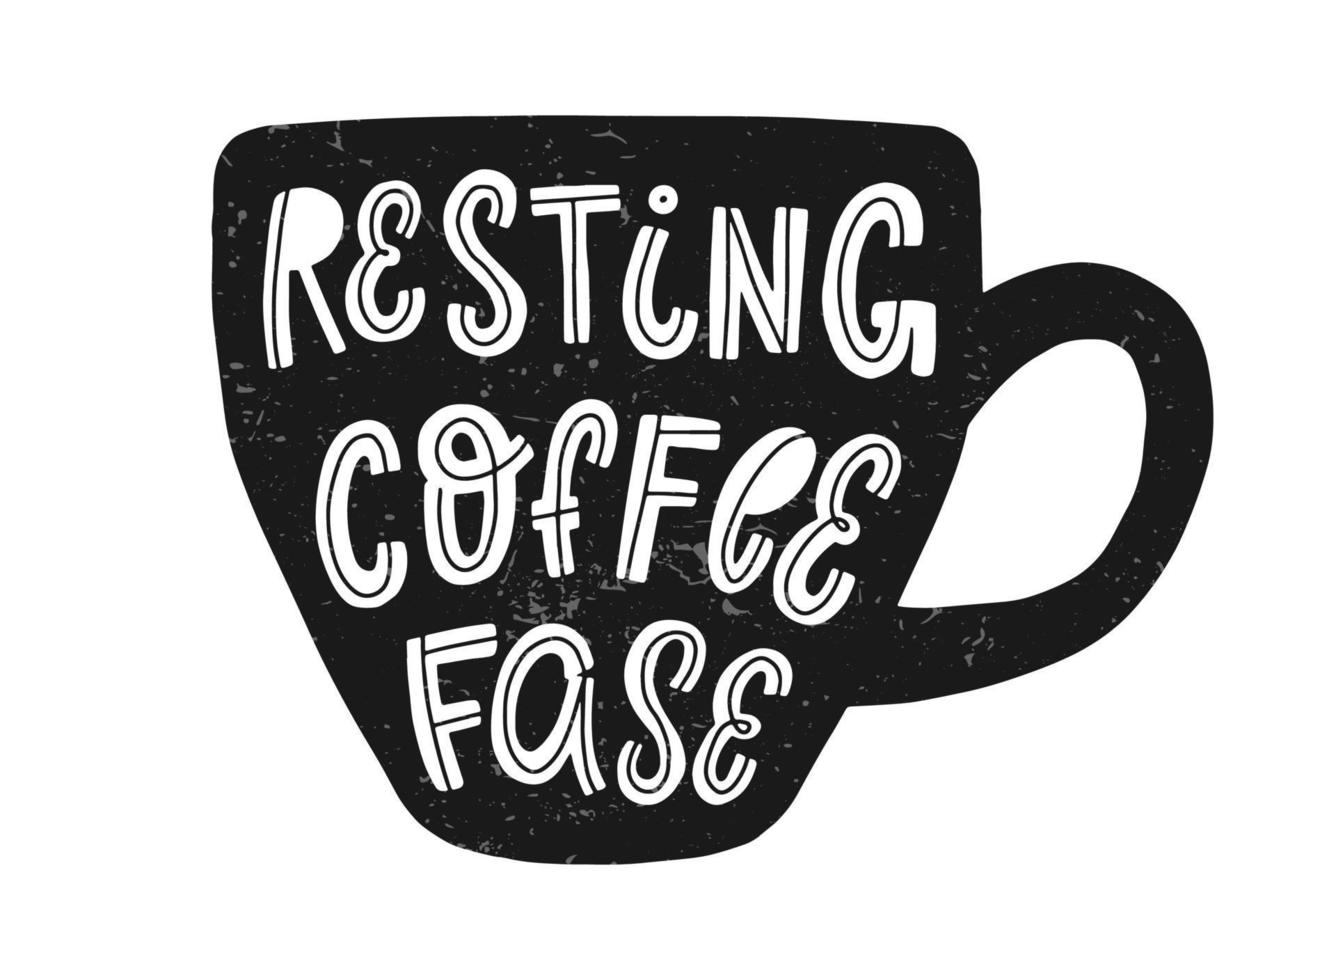 funny typography quote 'resting coffee face' drawn in a mug for posters, banners, prints, cards, signs, etc. vector